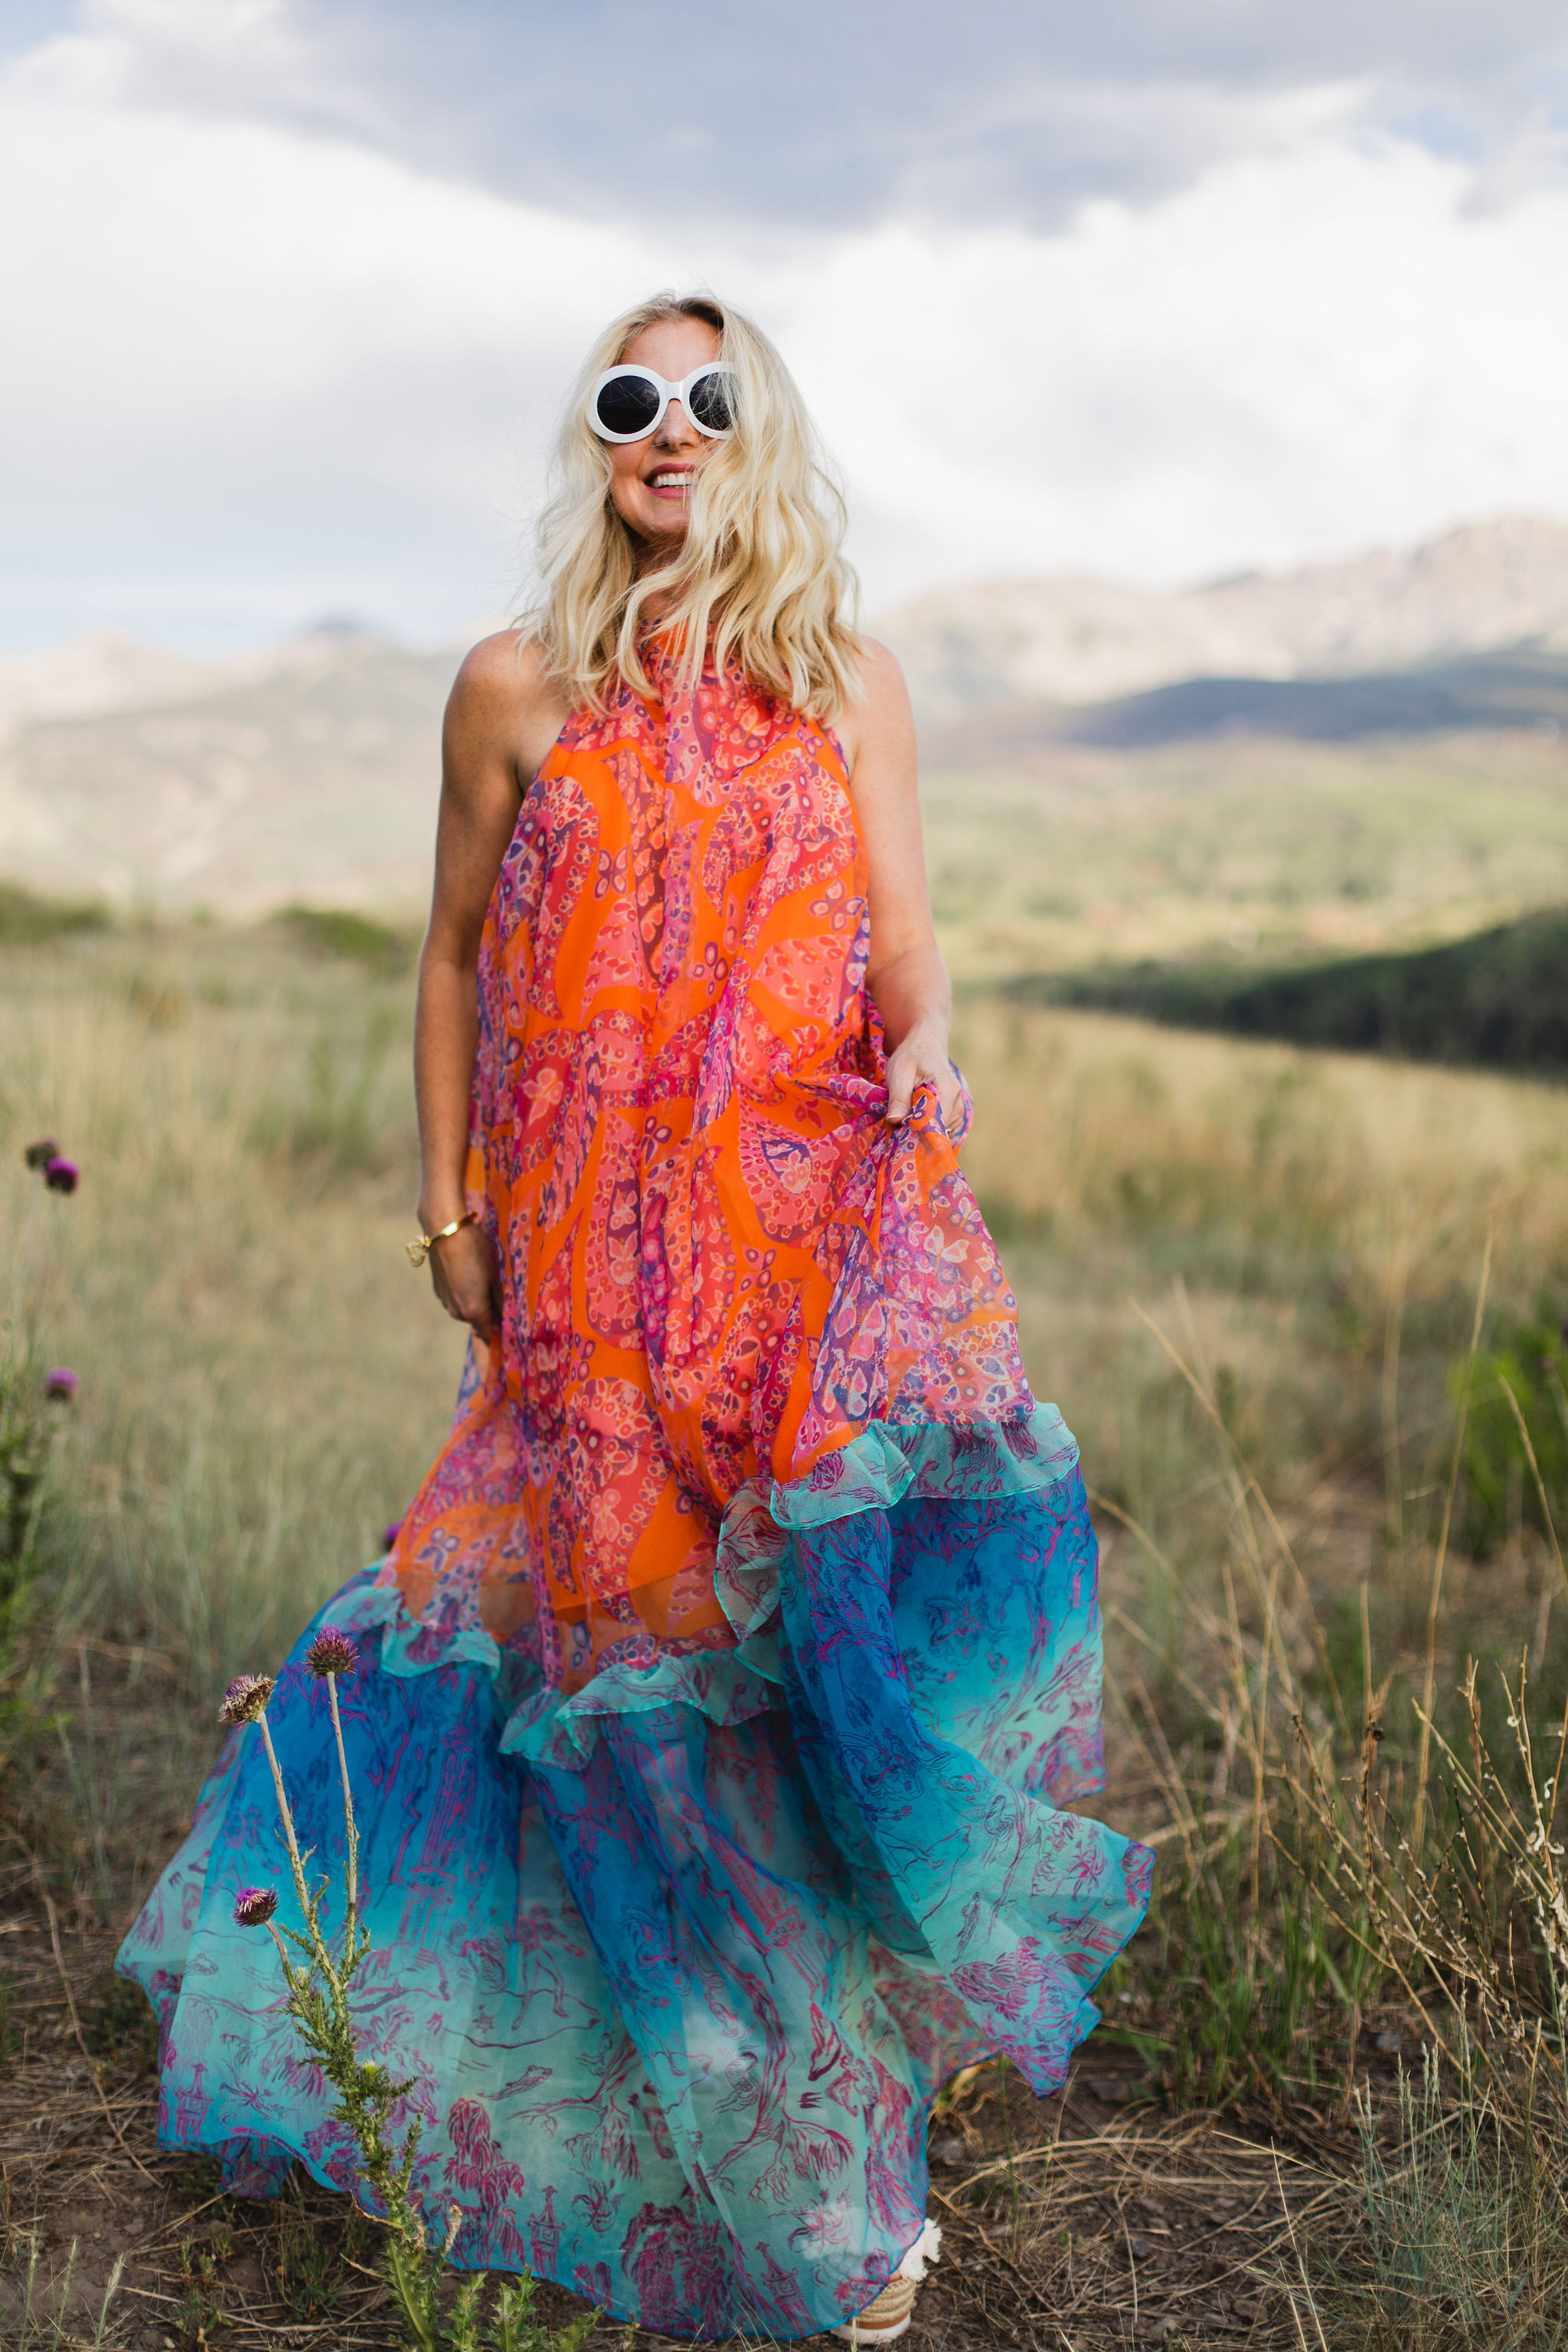 How To Manifest Anything, Fashion blogger Erin Busbee of Busbee Style wearing an orange and blue Staud Ina dress with white sunglasses walking around in Telluride, Colorado